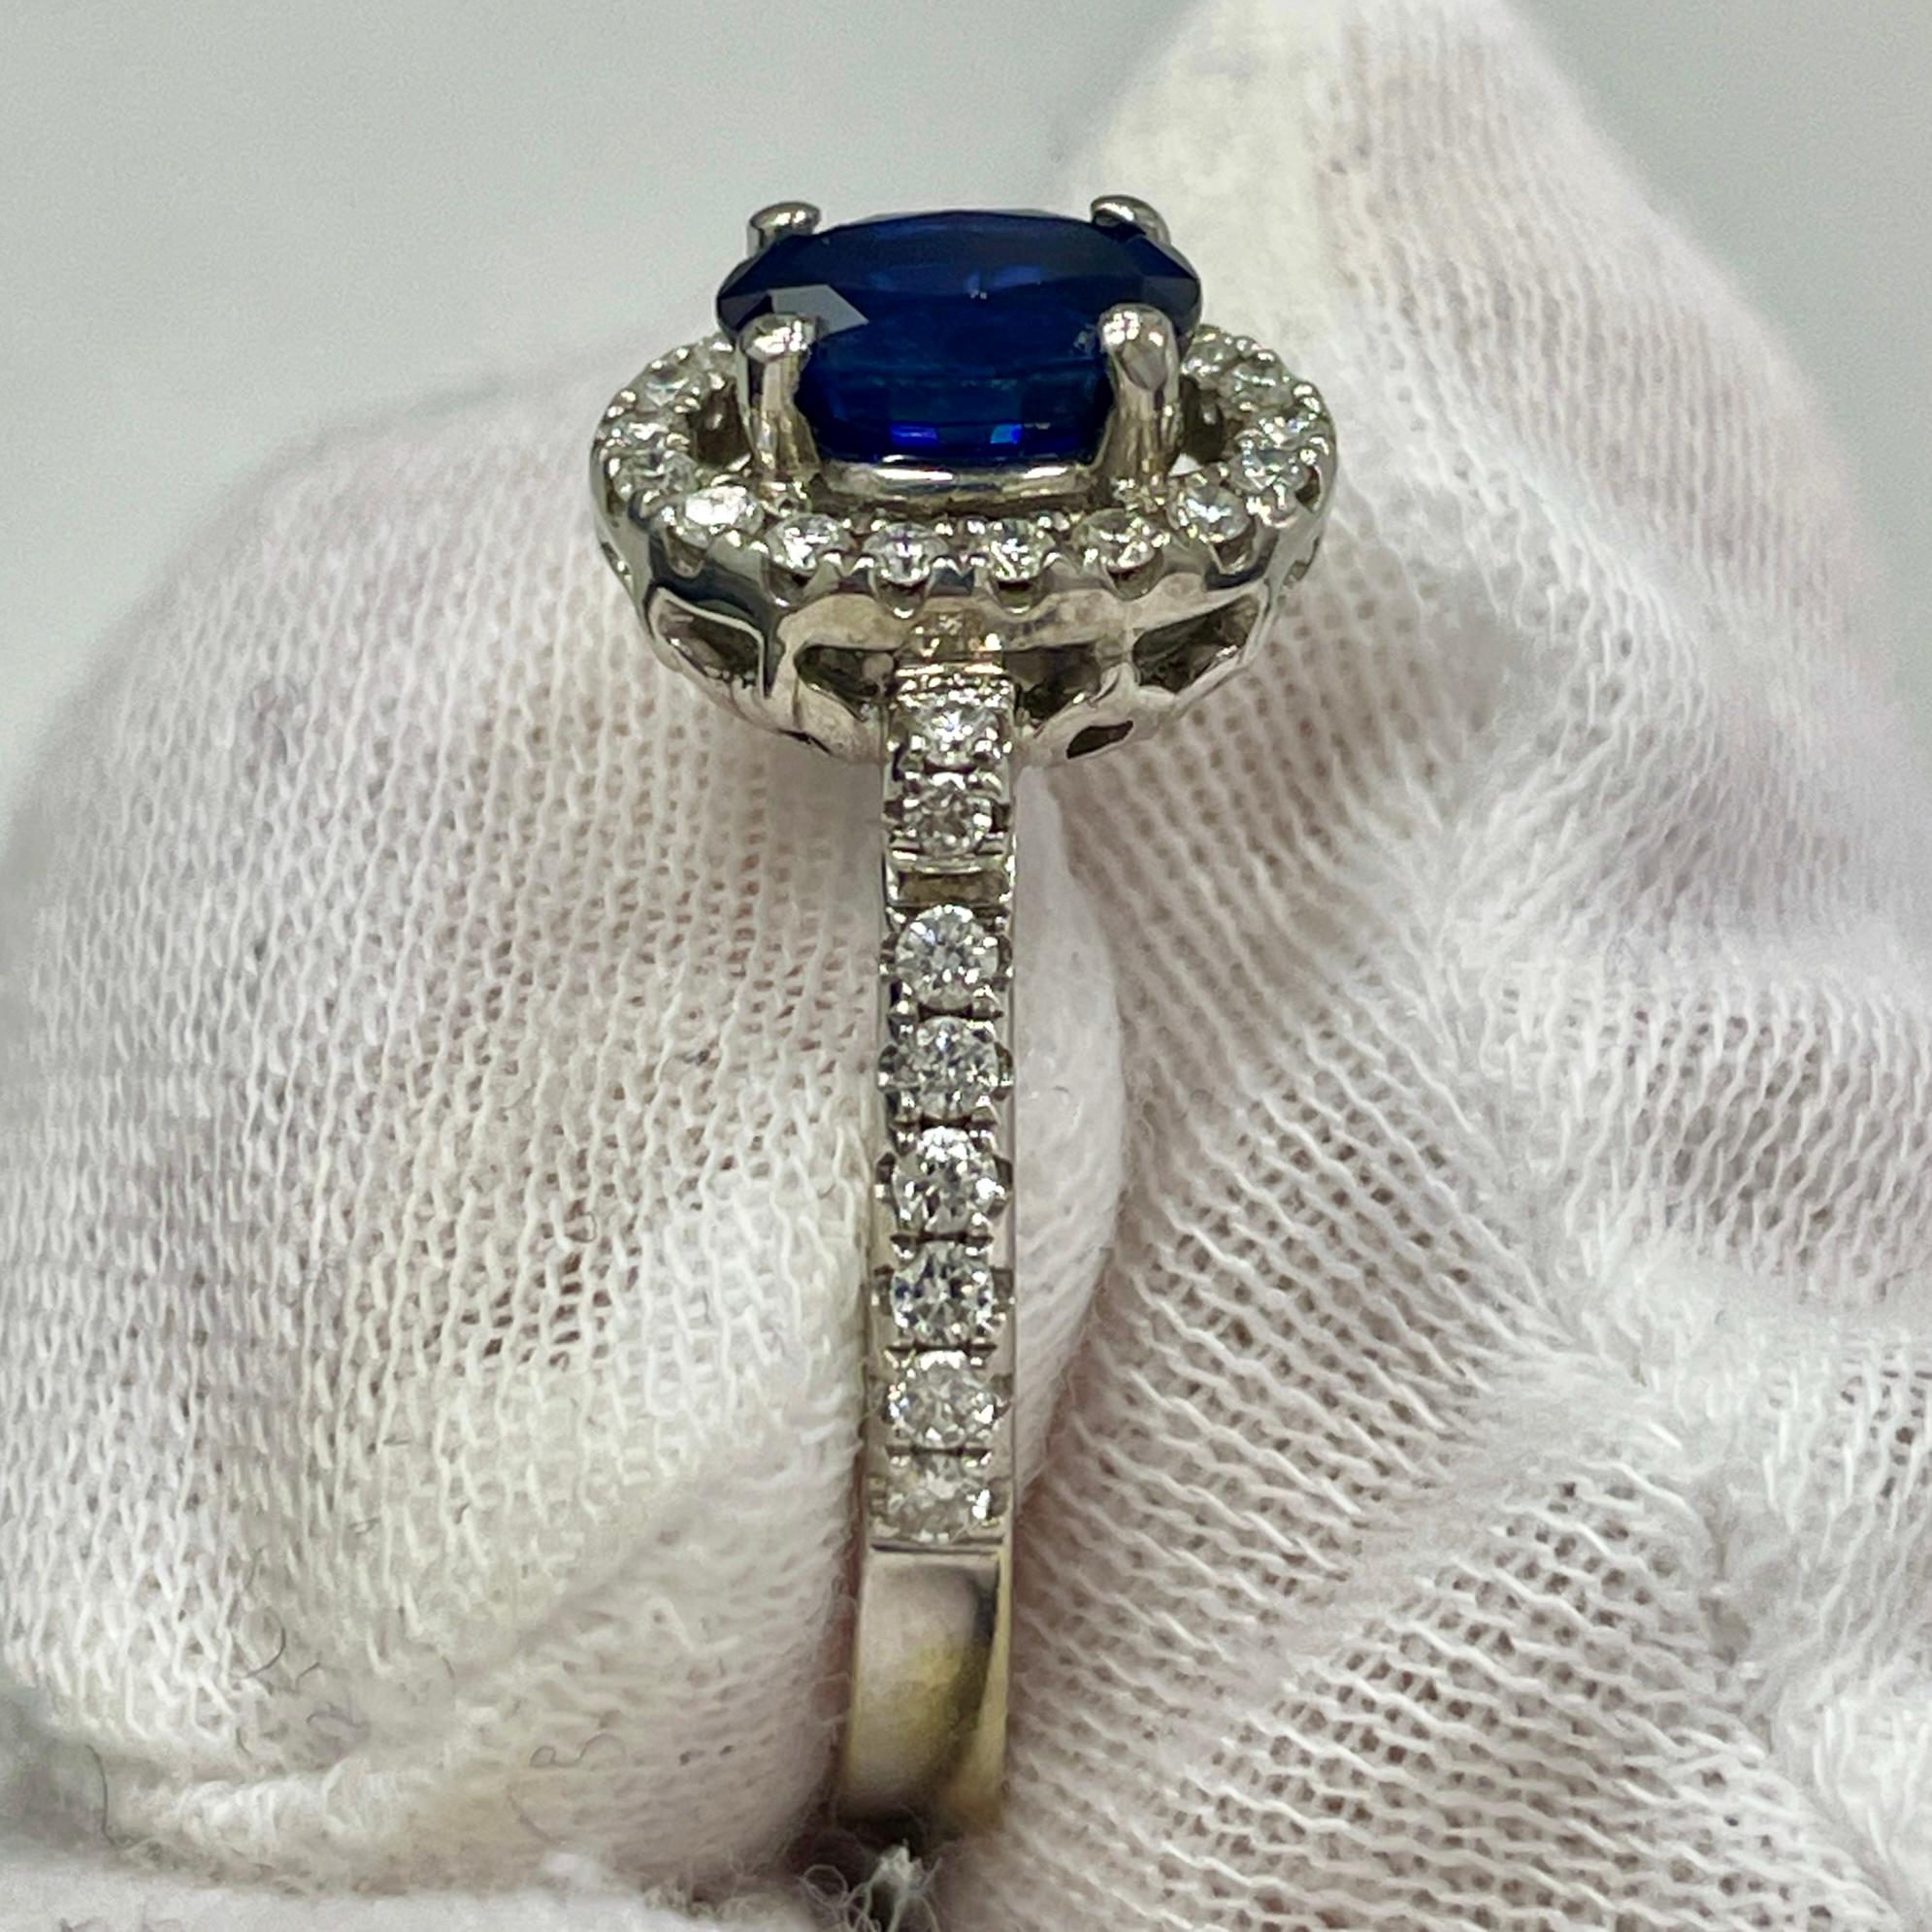 This is a royal blue oval sapphire mounted in an elegant 18K white gold ring with 0.35Ct of brilliant white diamonds. Suitable for any occasion!